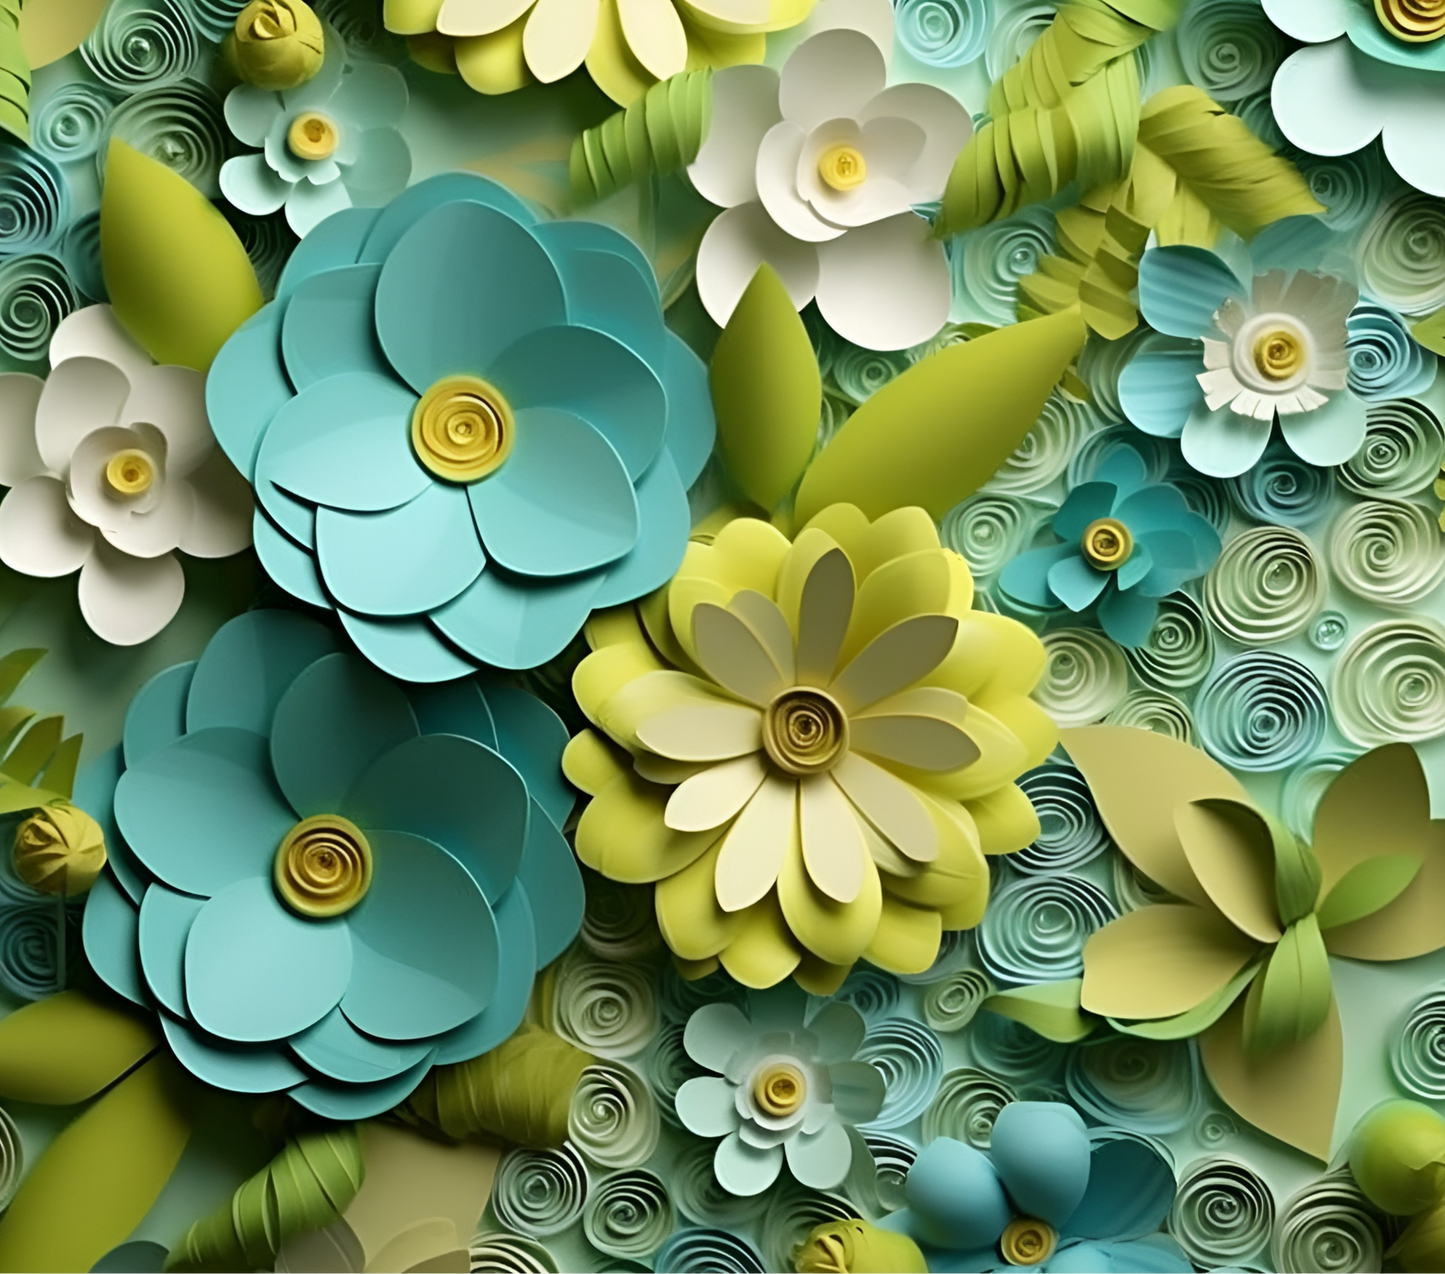 3D BLUE AND GREEN FLOWERS